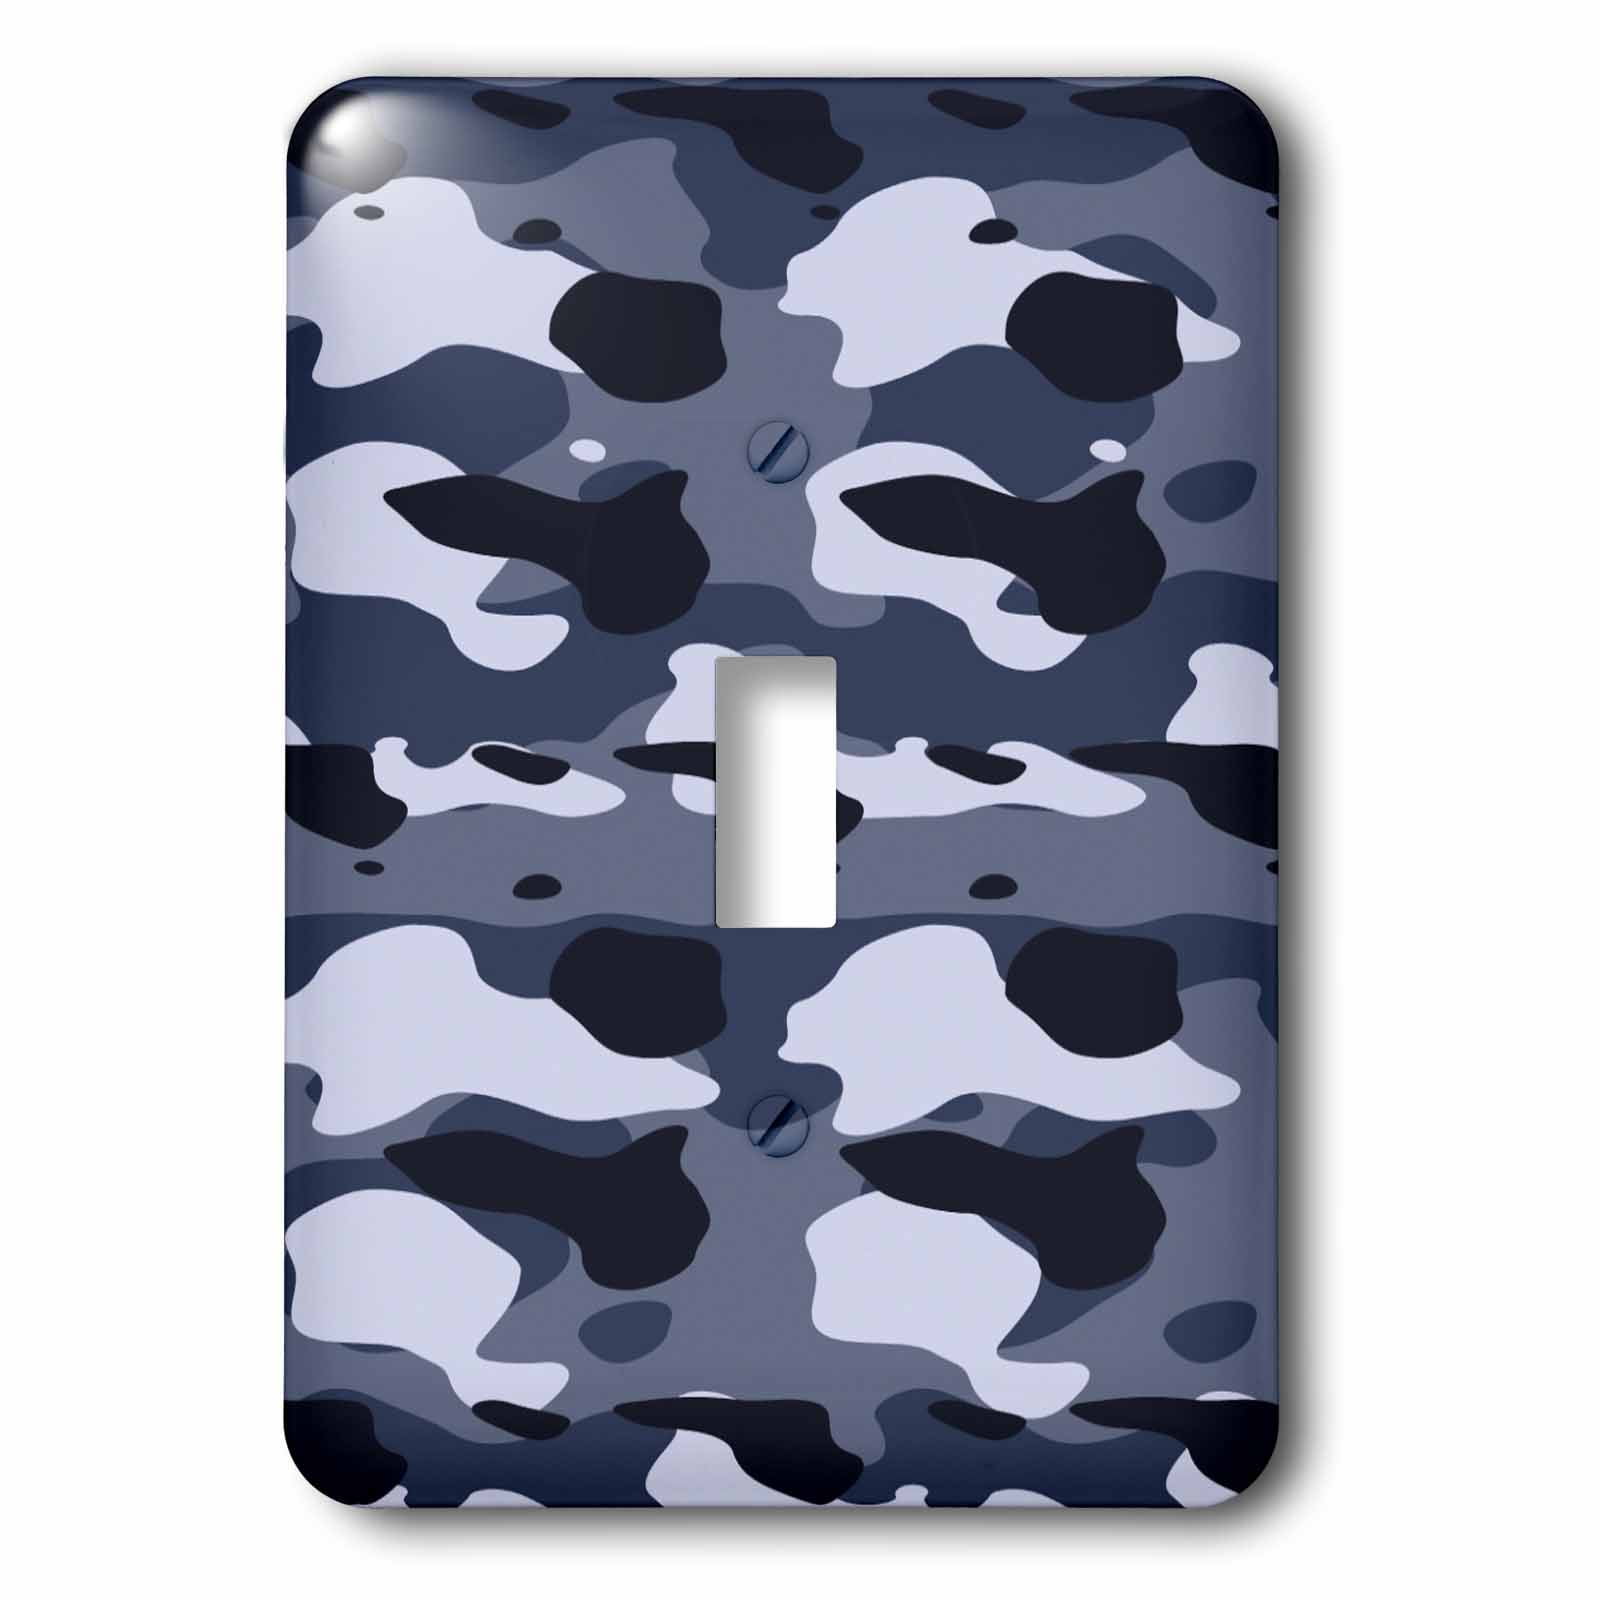 Usa Single Toggle Switch Blue Military Patriotic 3dRose lsp_36146_1 Camouflage